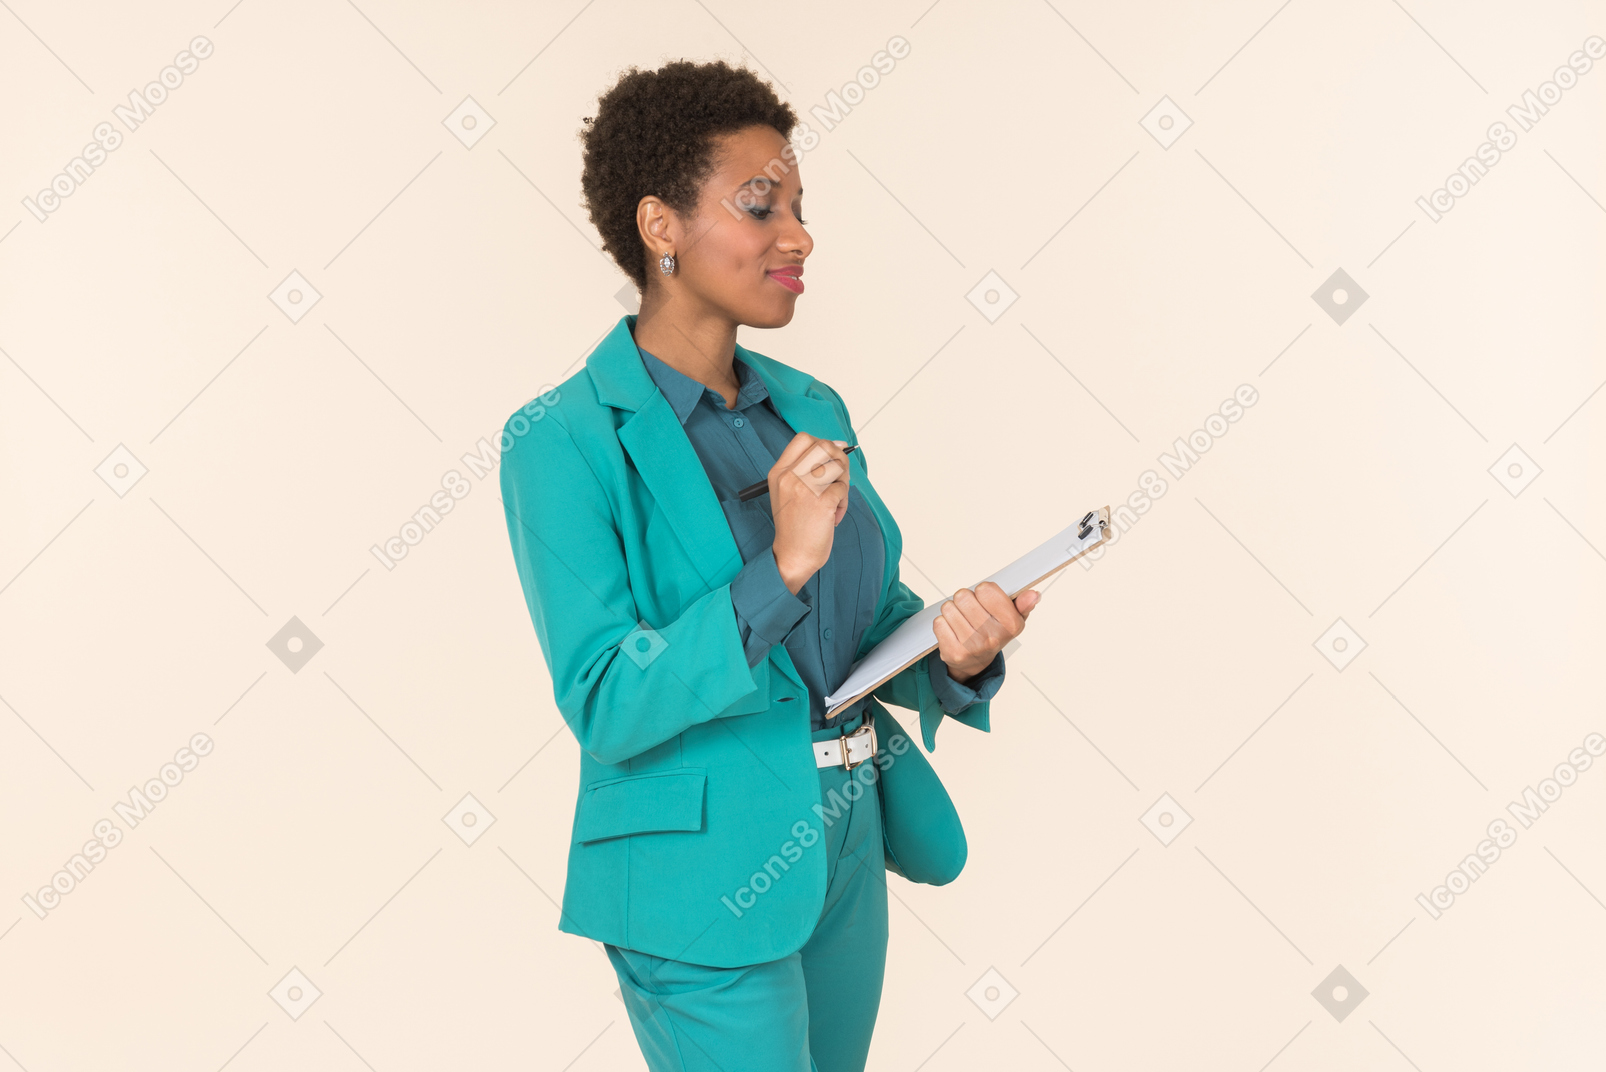 Pensive female office worker holding folder and standing in profile